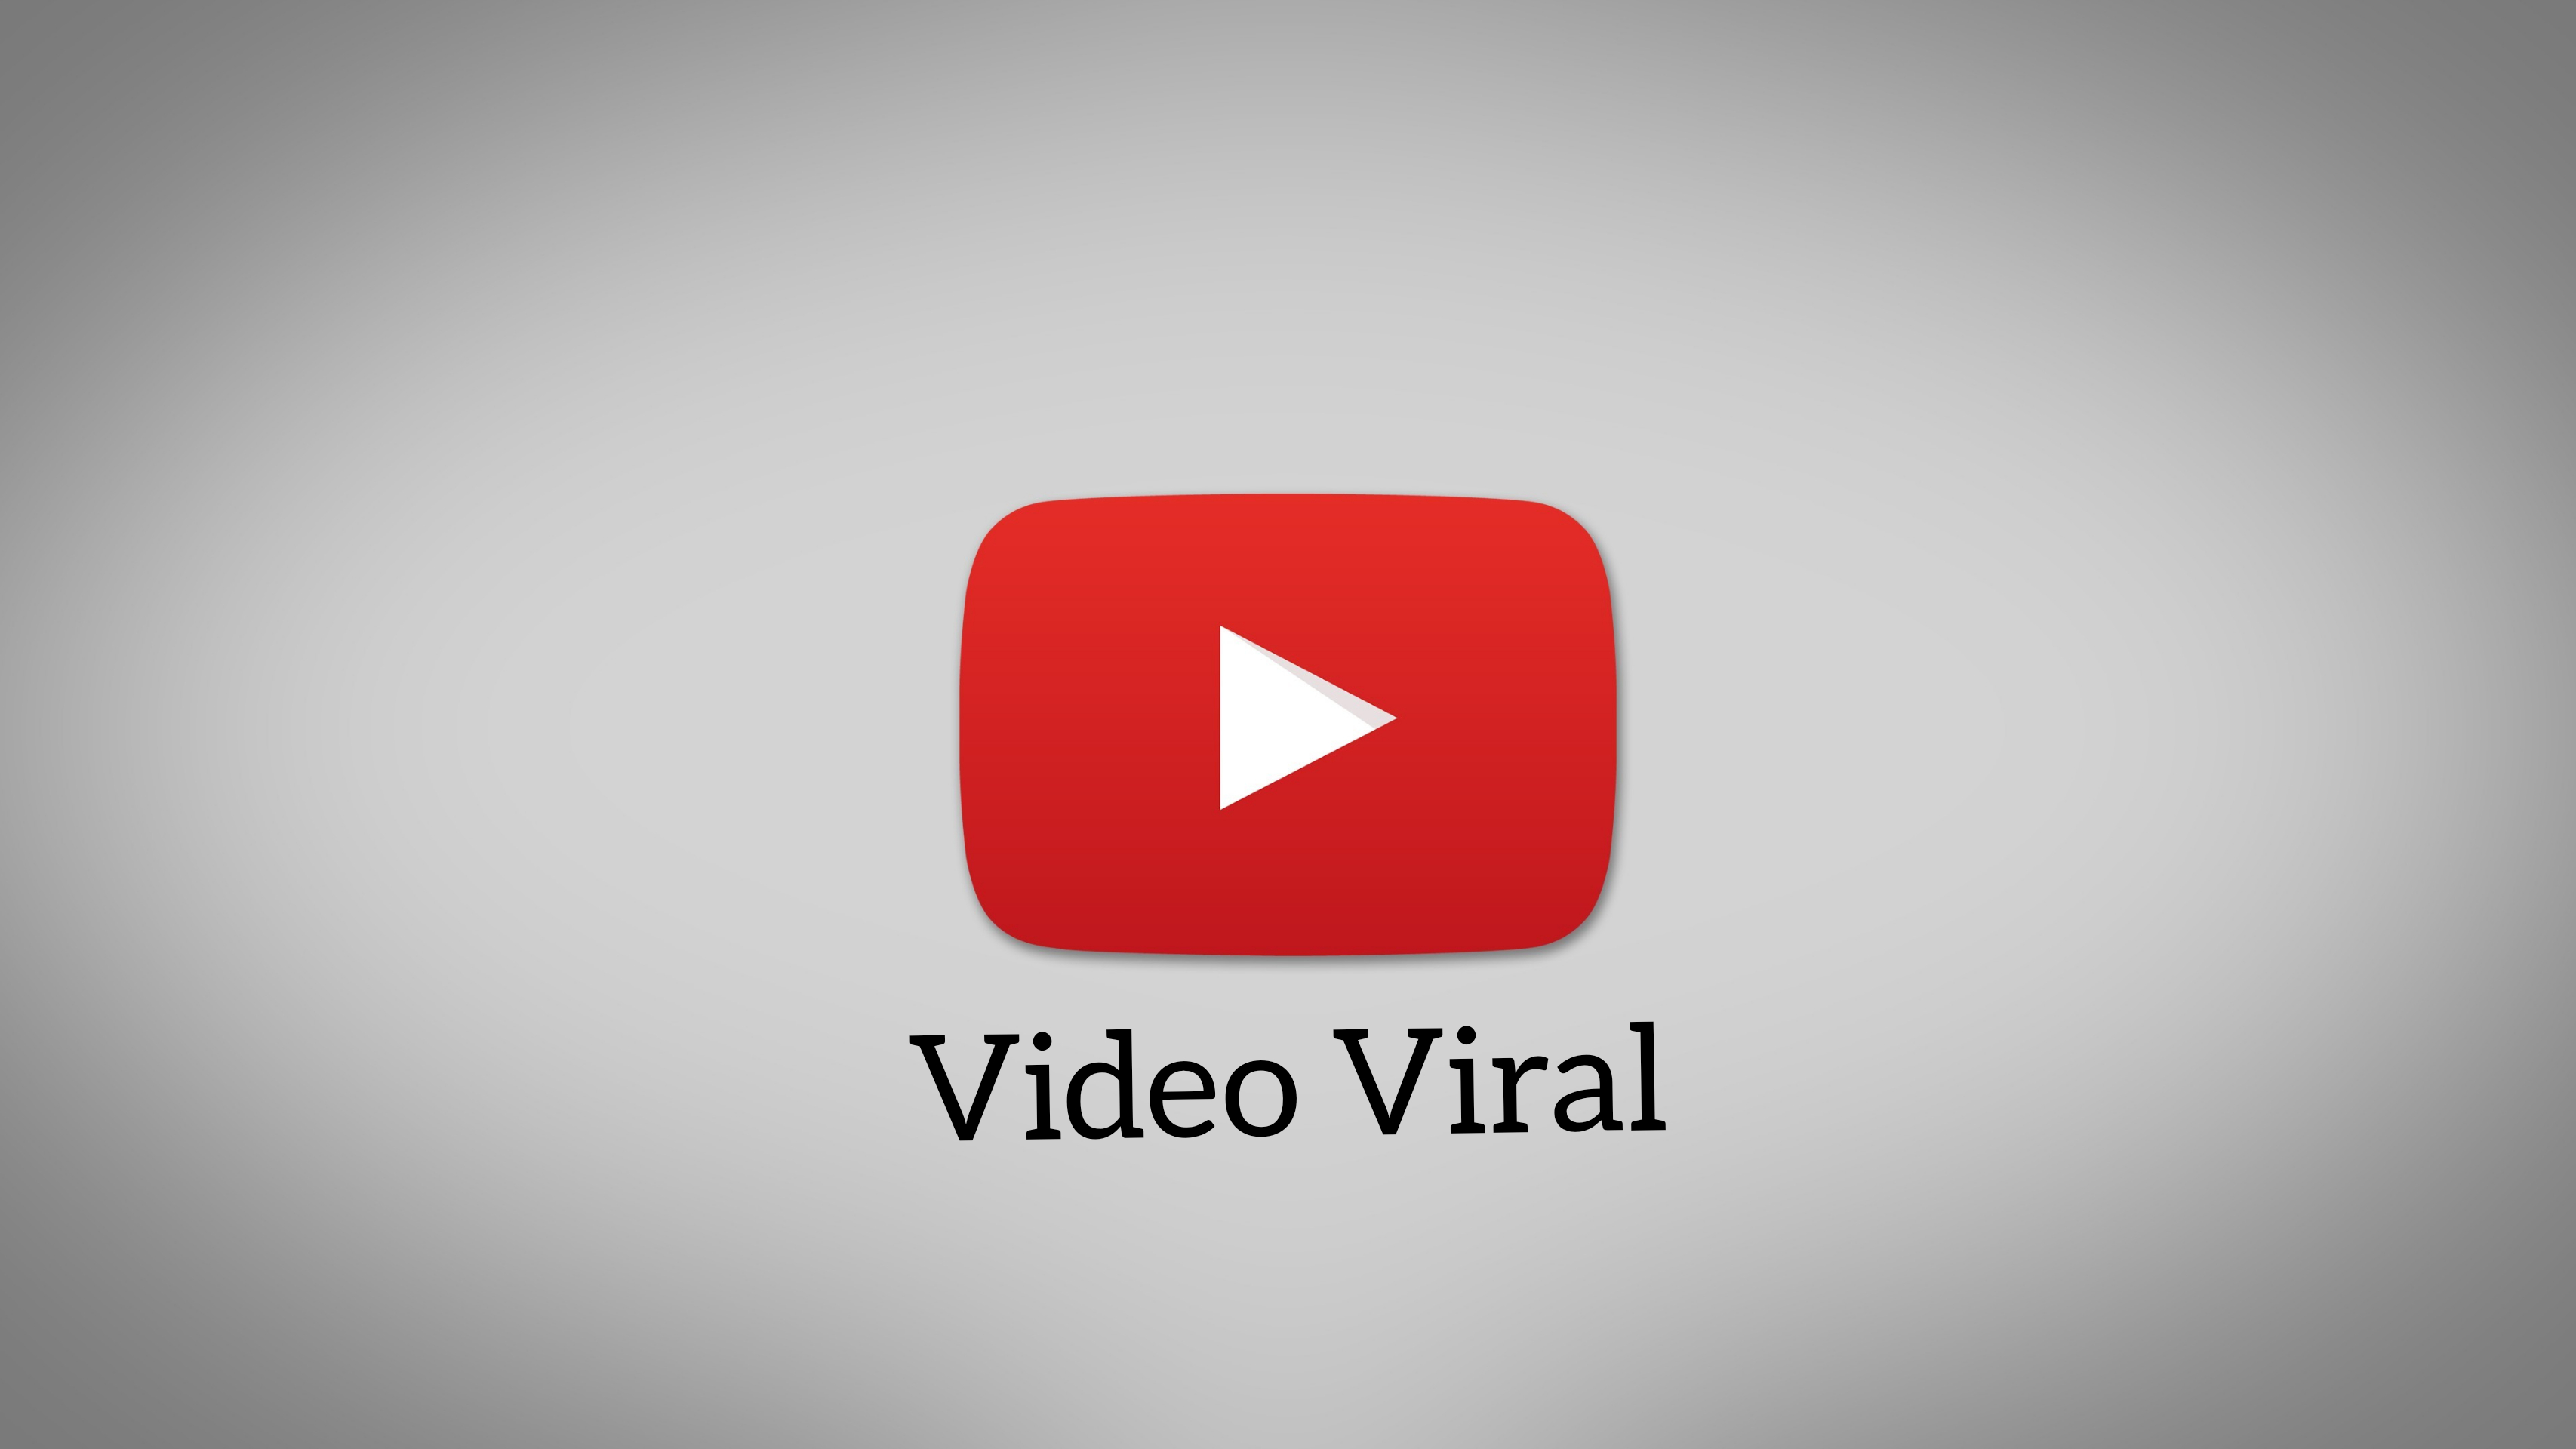 Youtube, subscriber increase, how to viral, viral, videos, views, how to, likes, comments, sharings, increase, techy duggu